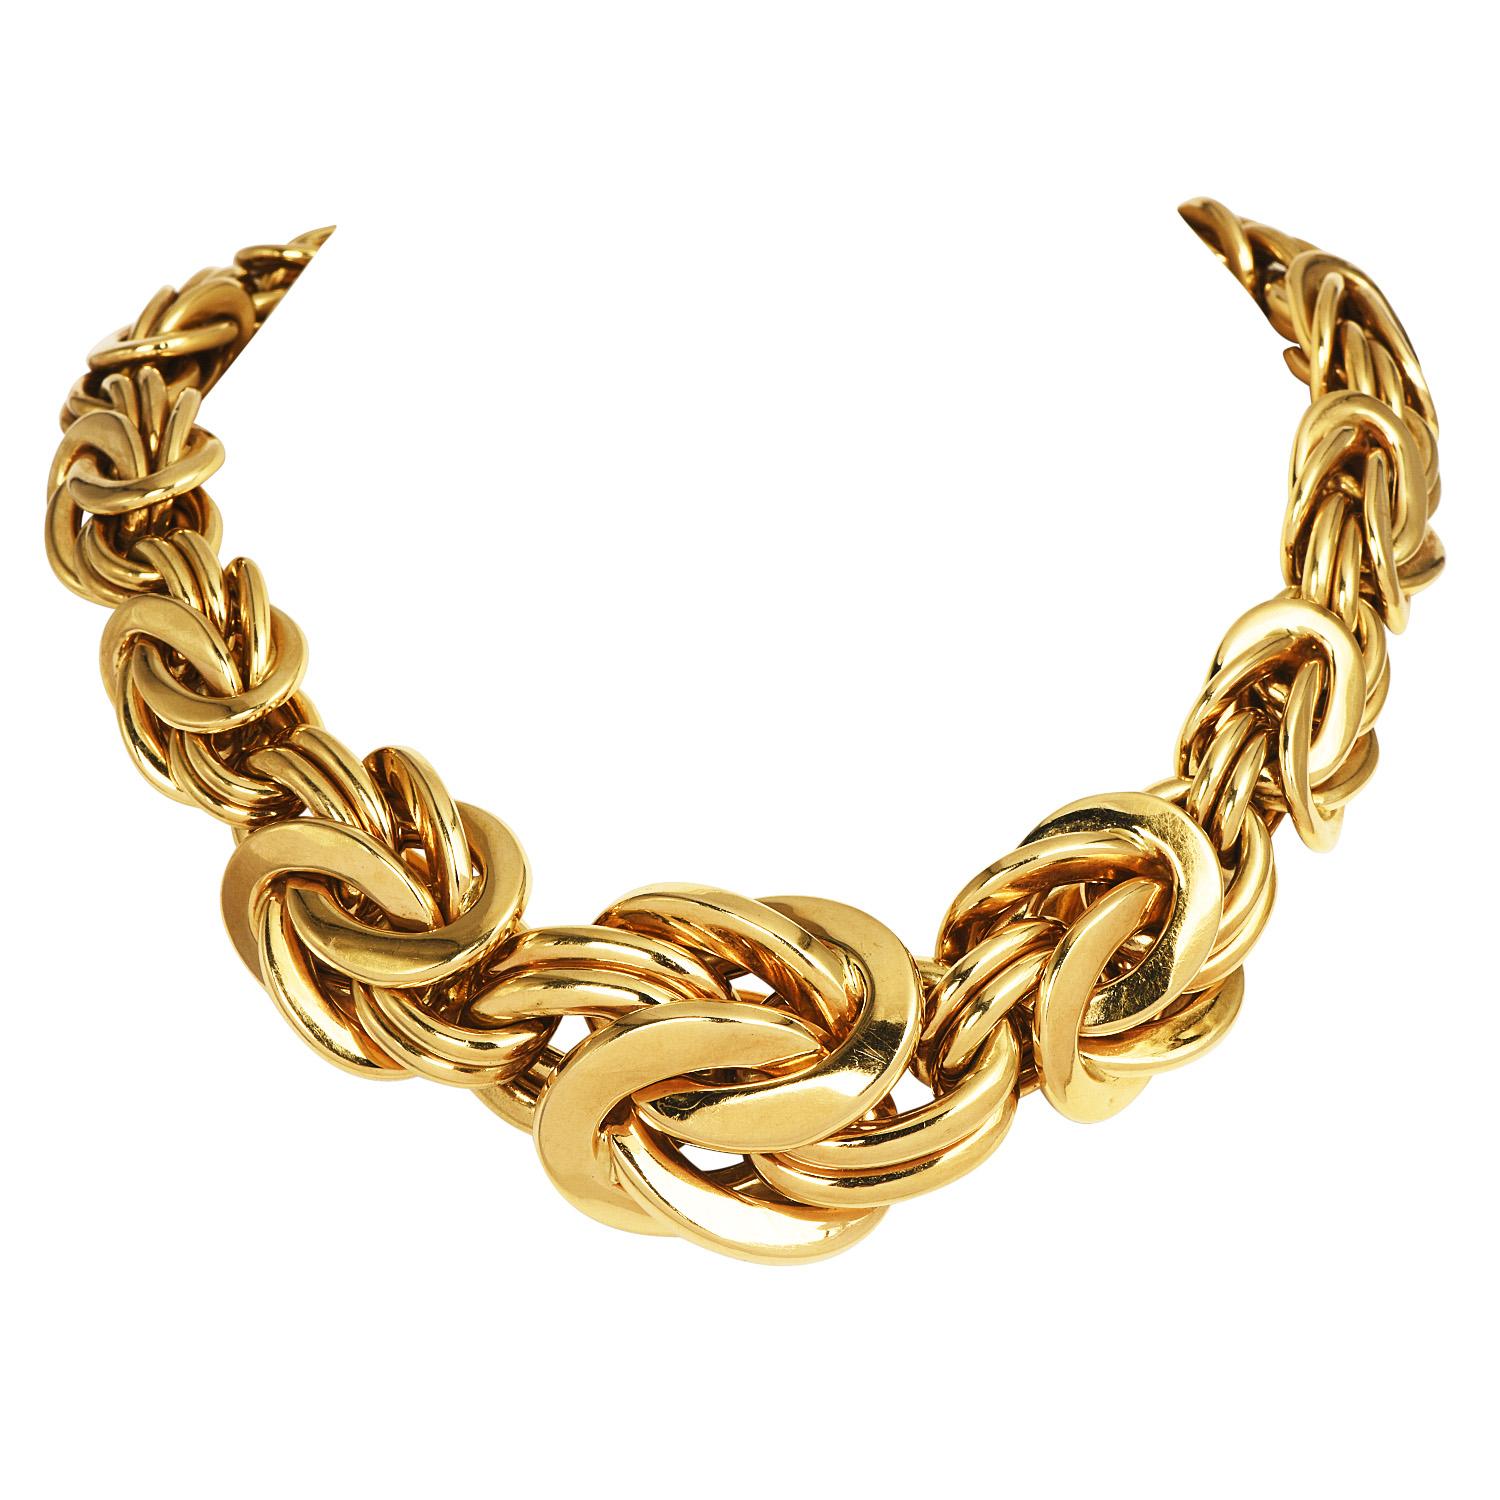 Compliment any outfit with an opulent look!

This Heavy  1980s vintage graduated byzantine design link makes this piece a rare piece to find!

Crafted in luxurious solid 18K yellow, high-quality links with a highly polished finish. A jaw-dropping